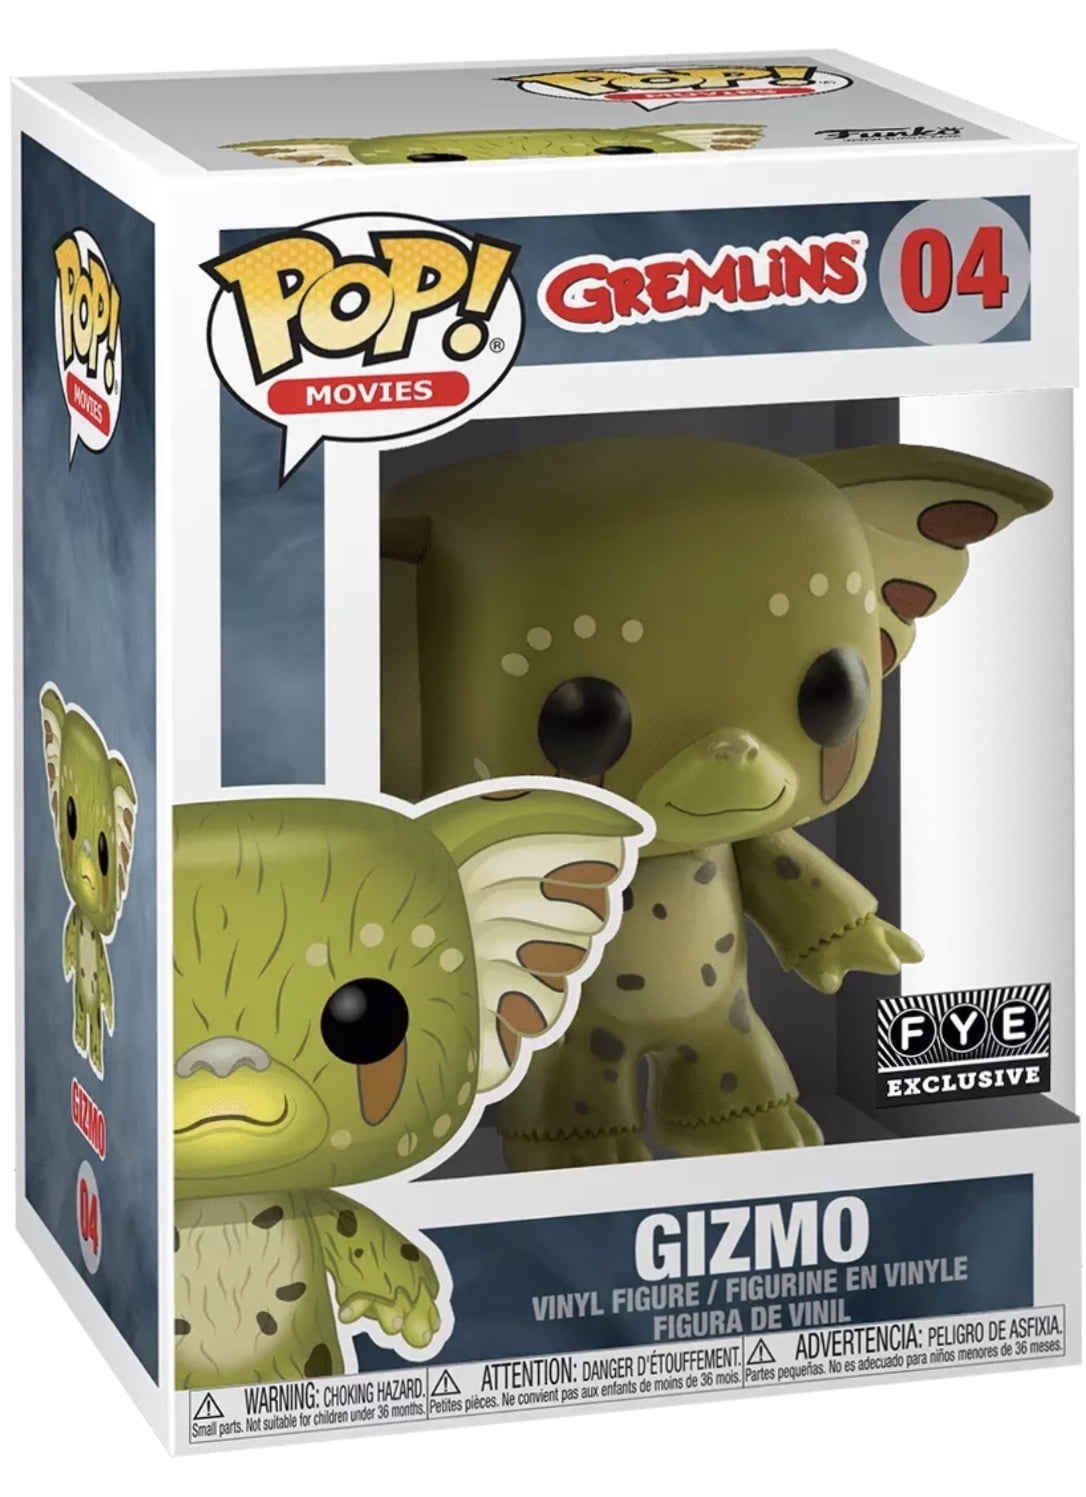 Funko Gremlins Gizmo Pop Vinyl Figure - Gremlins Gizmo Pop Vinyl Figure .  Buy Action Figures toys in India. shop for Funko products in India.